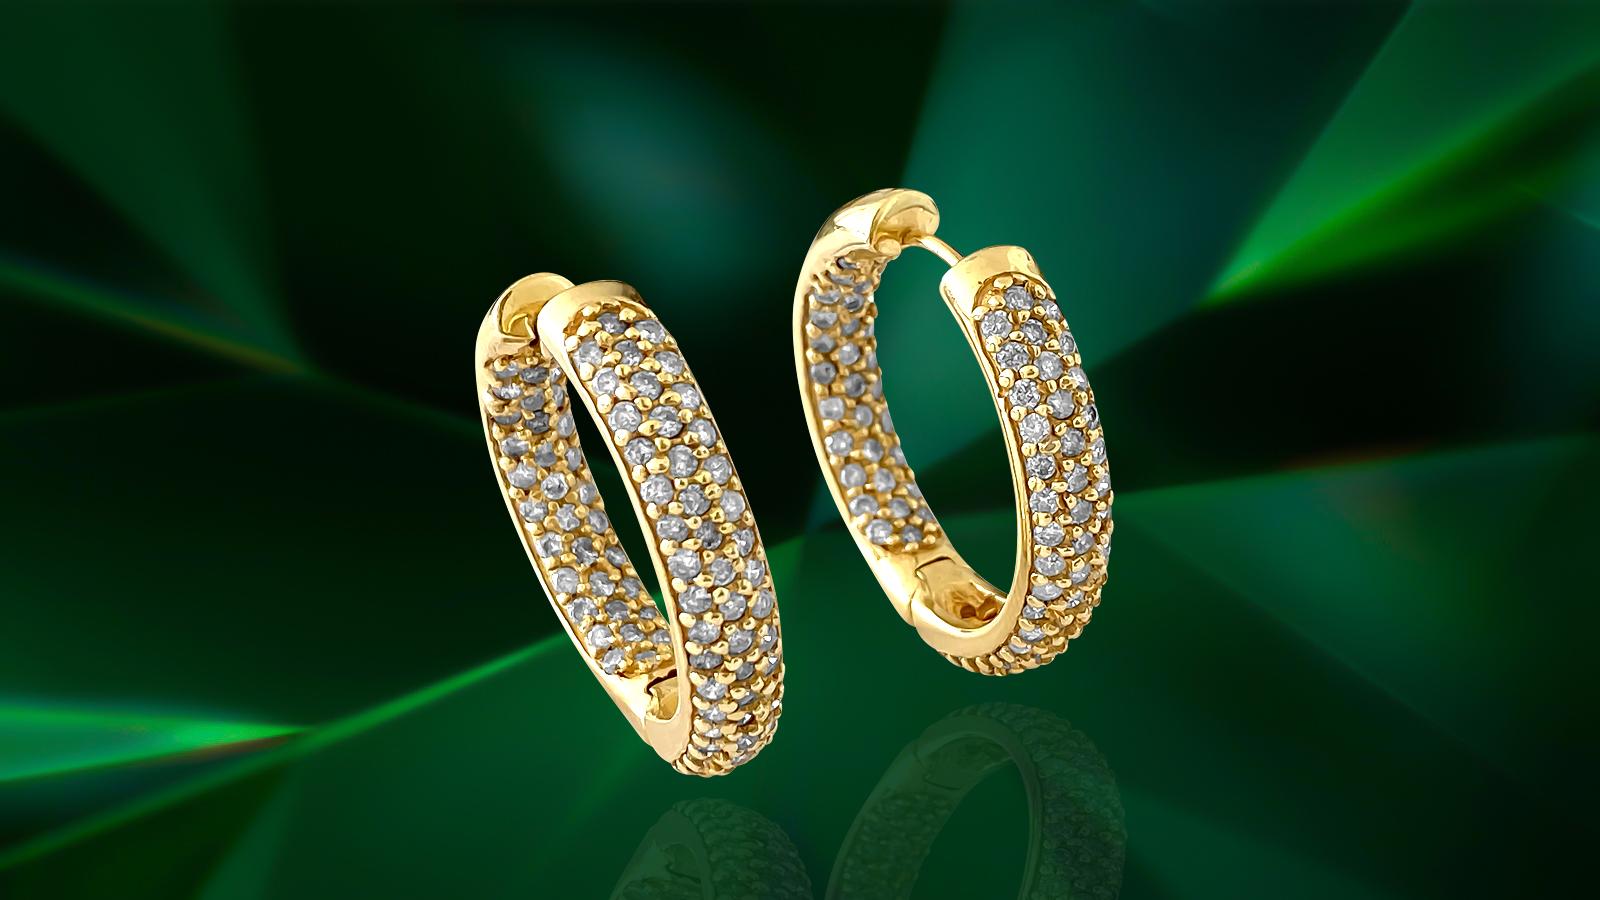 Metal: 14K Yellow gold. 

2.50 carat diamonds total. VS clarity and F-G color. Round brilliant cut. 100% natural earth mined. Diamonds set in the interior and exterior of the diamonds, making it rare piece of fine jewelry. 
High luster and shine in